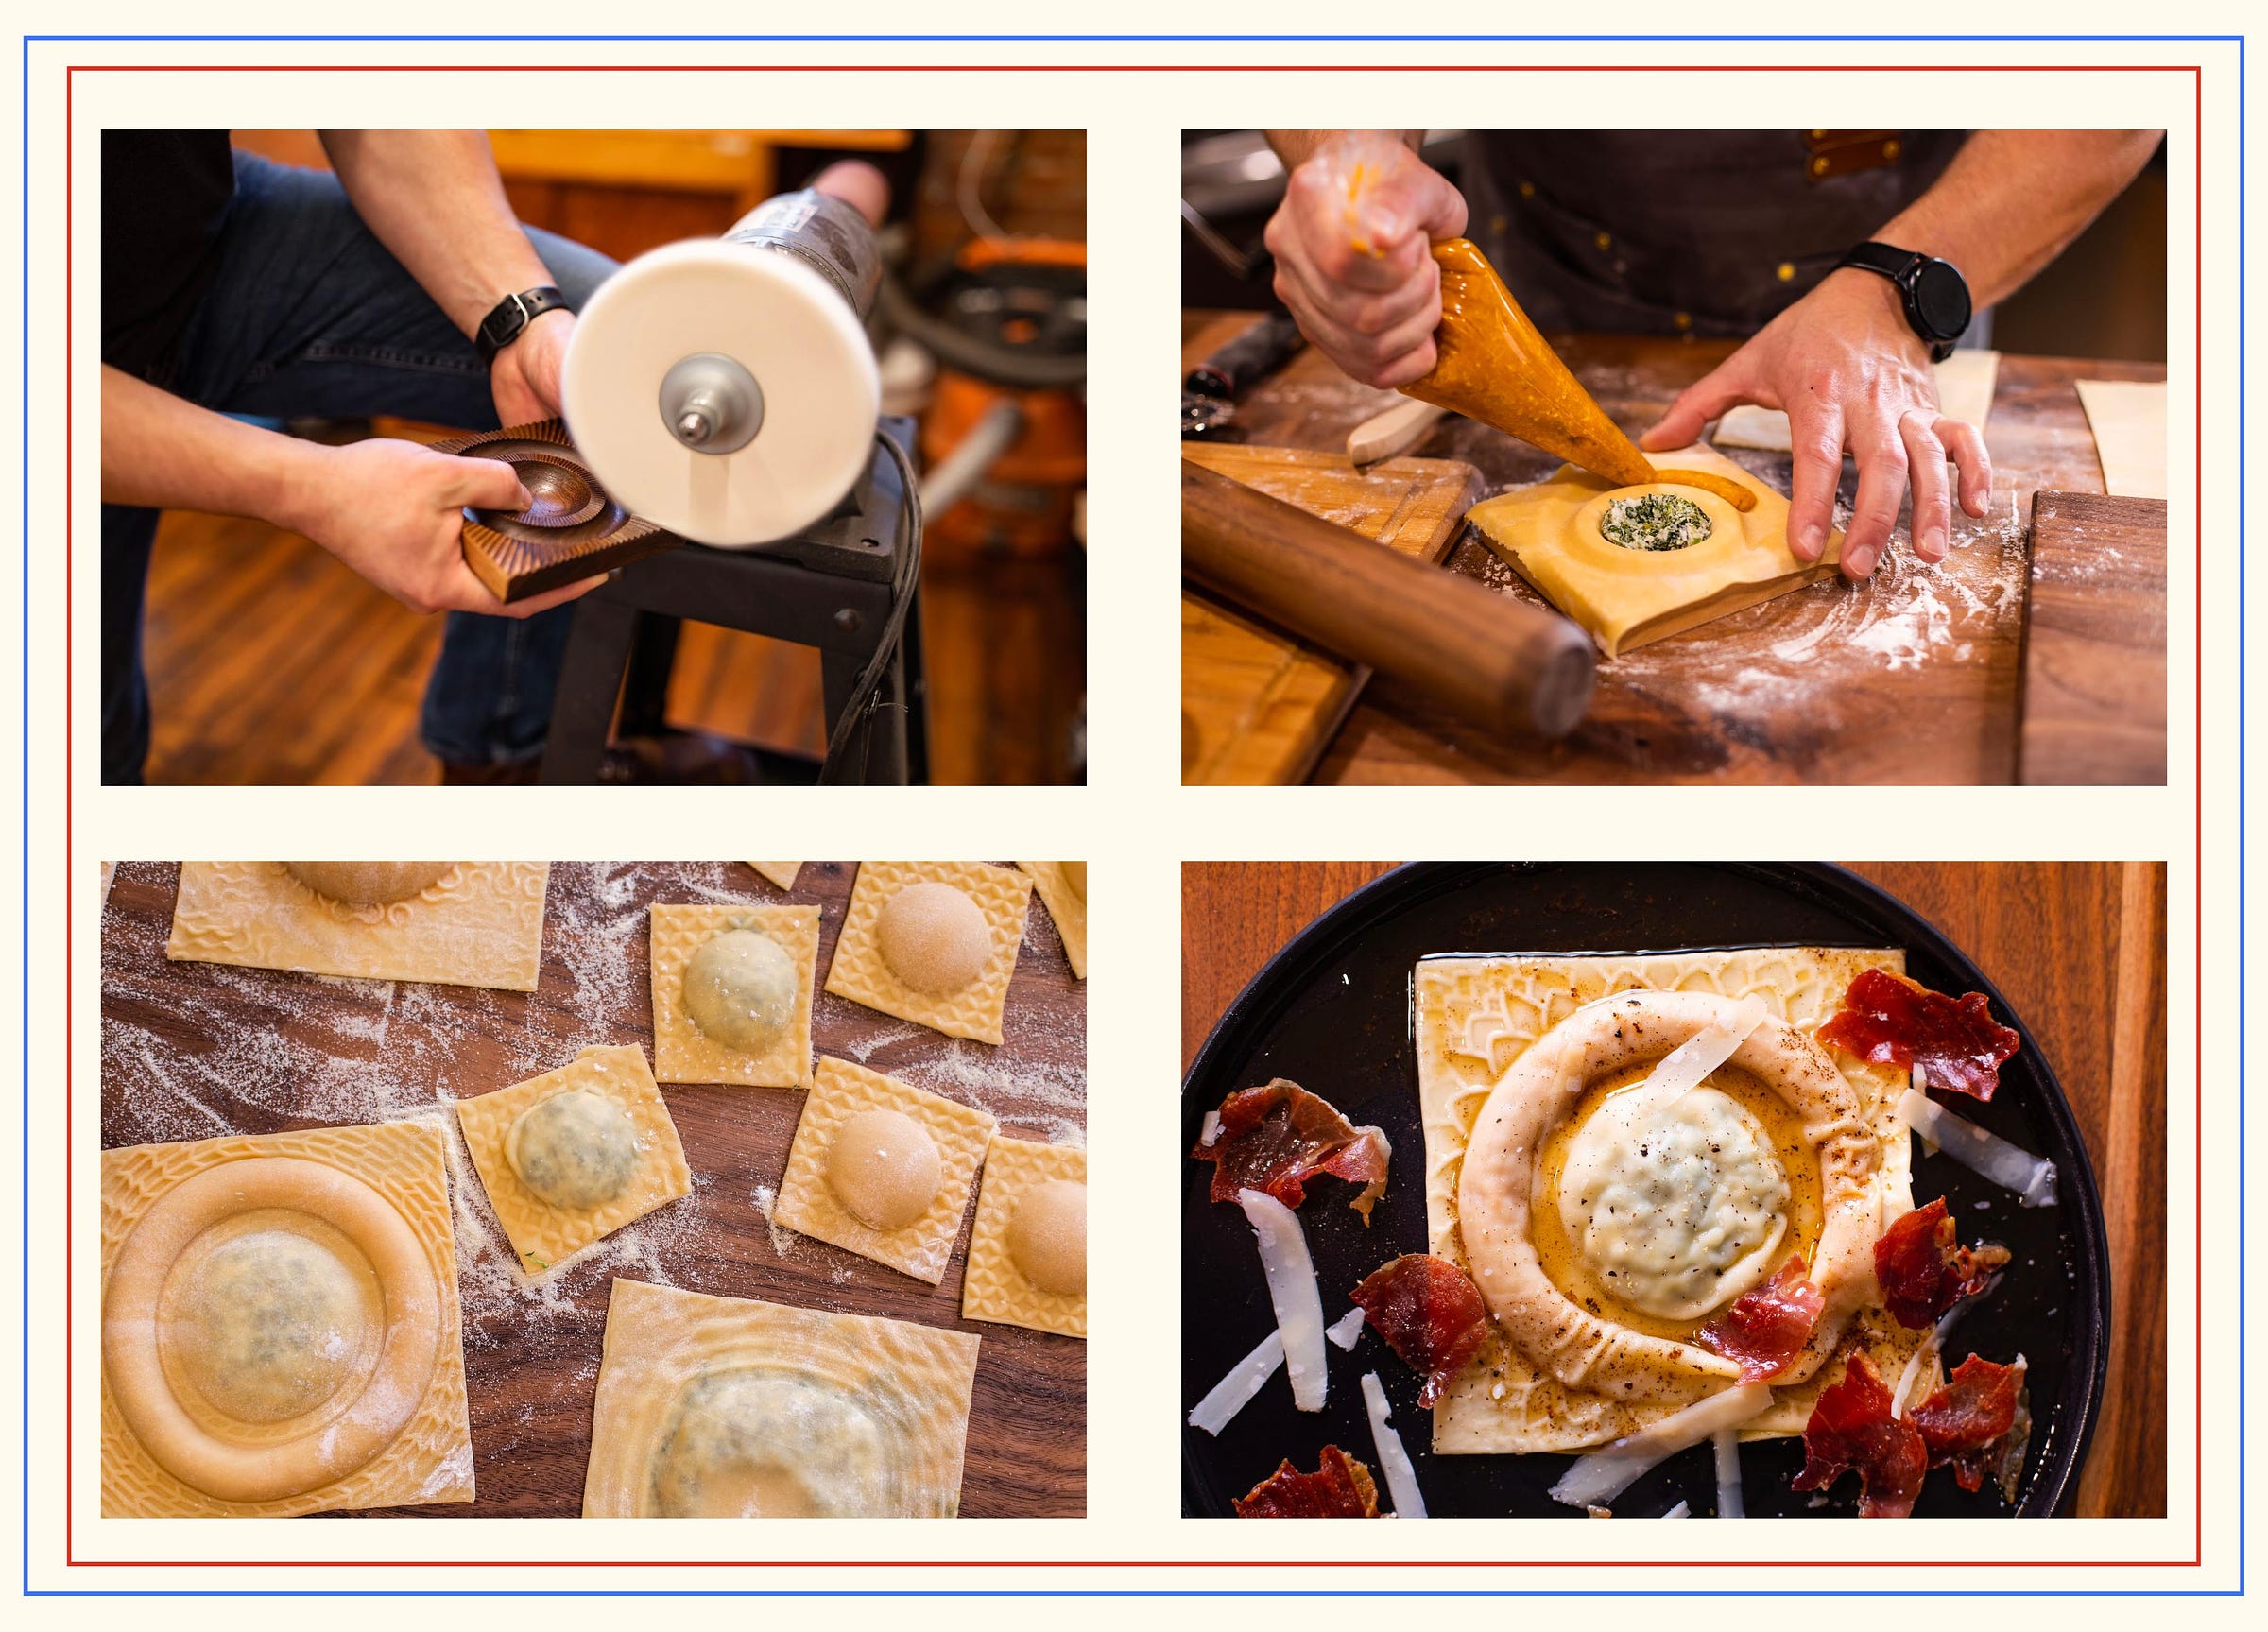 four photos showing, in progression, a ravioli mold getting sanded, then a bullseye-shaped mold getting piped with two different fillings, then a tabletop covered with finished molded ravioli, and finally a plate of cooked ravioli topped with parmesan cheese and crispy prosciutto